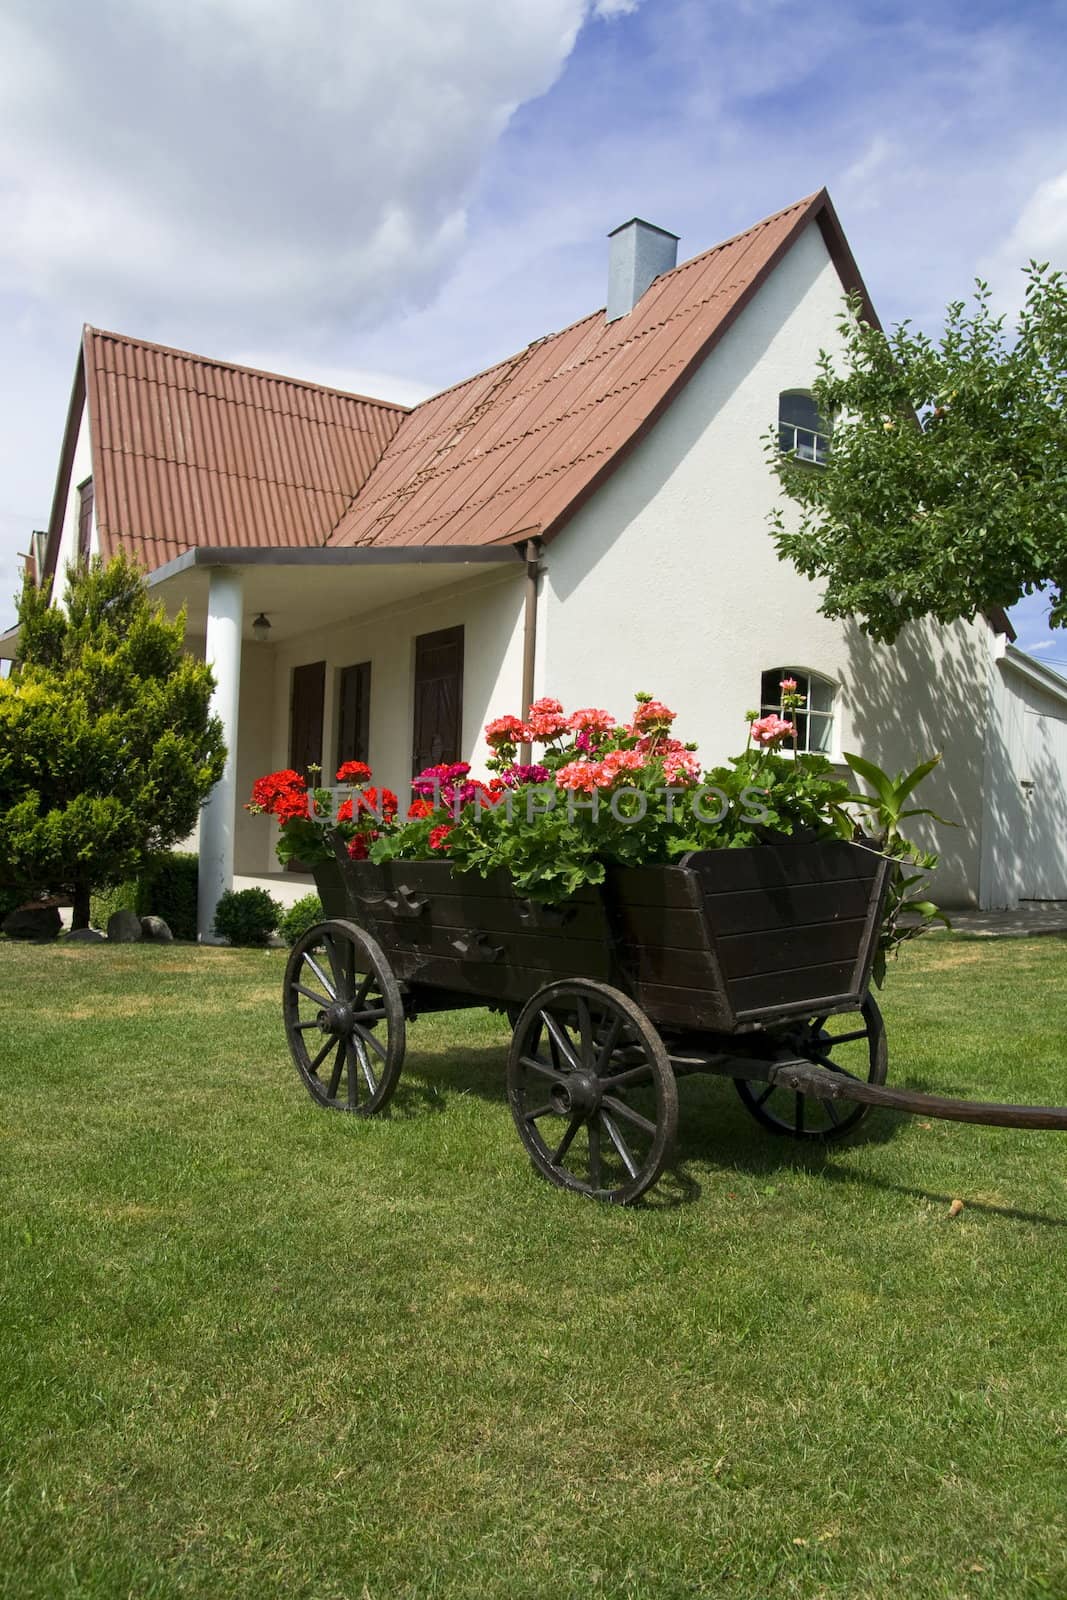 Yard's decoration. A waggon with wooden wheels and with flowers in bloom